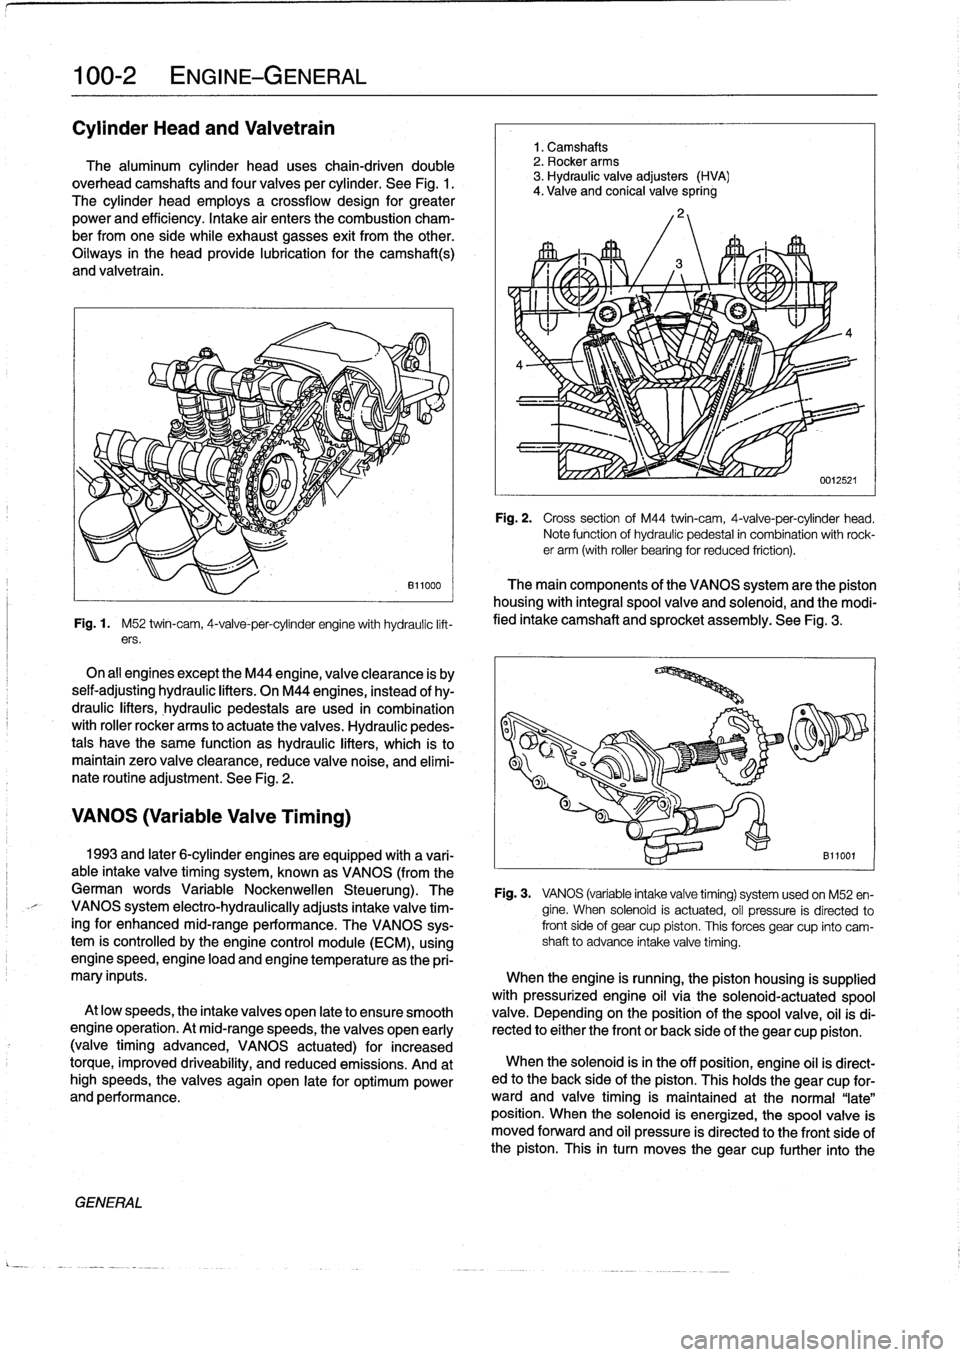 BMW 323i 1993 E36 Service Manual 
100-2
ENGINE-GENERAL

Cylinder
Head
and
Valvetrain

The
aluminum
cylinder
head
uses
chain-driven
double
overhead
camshafts
and
four
valves
per
cylinder
.
See
Fig
.
1
.

The
cylinder
head
employs
a
cr